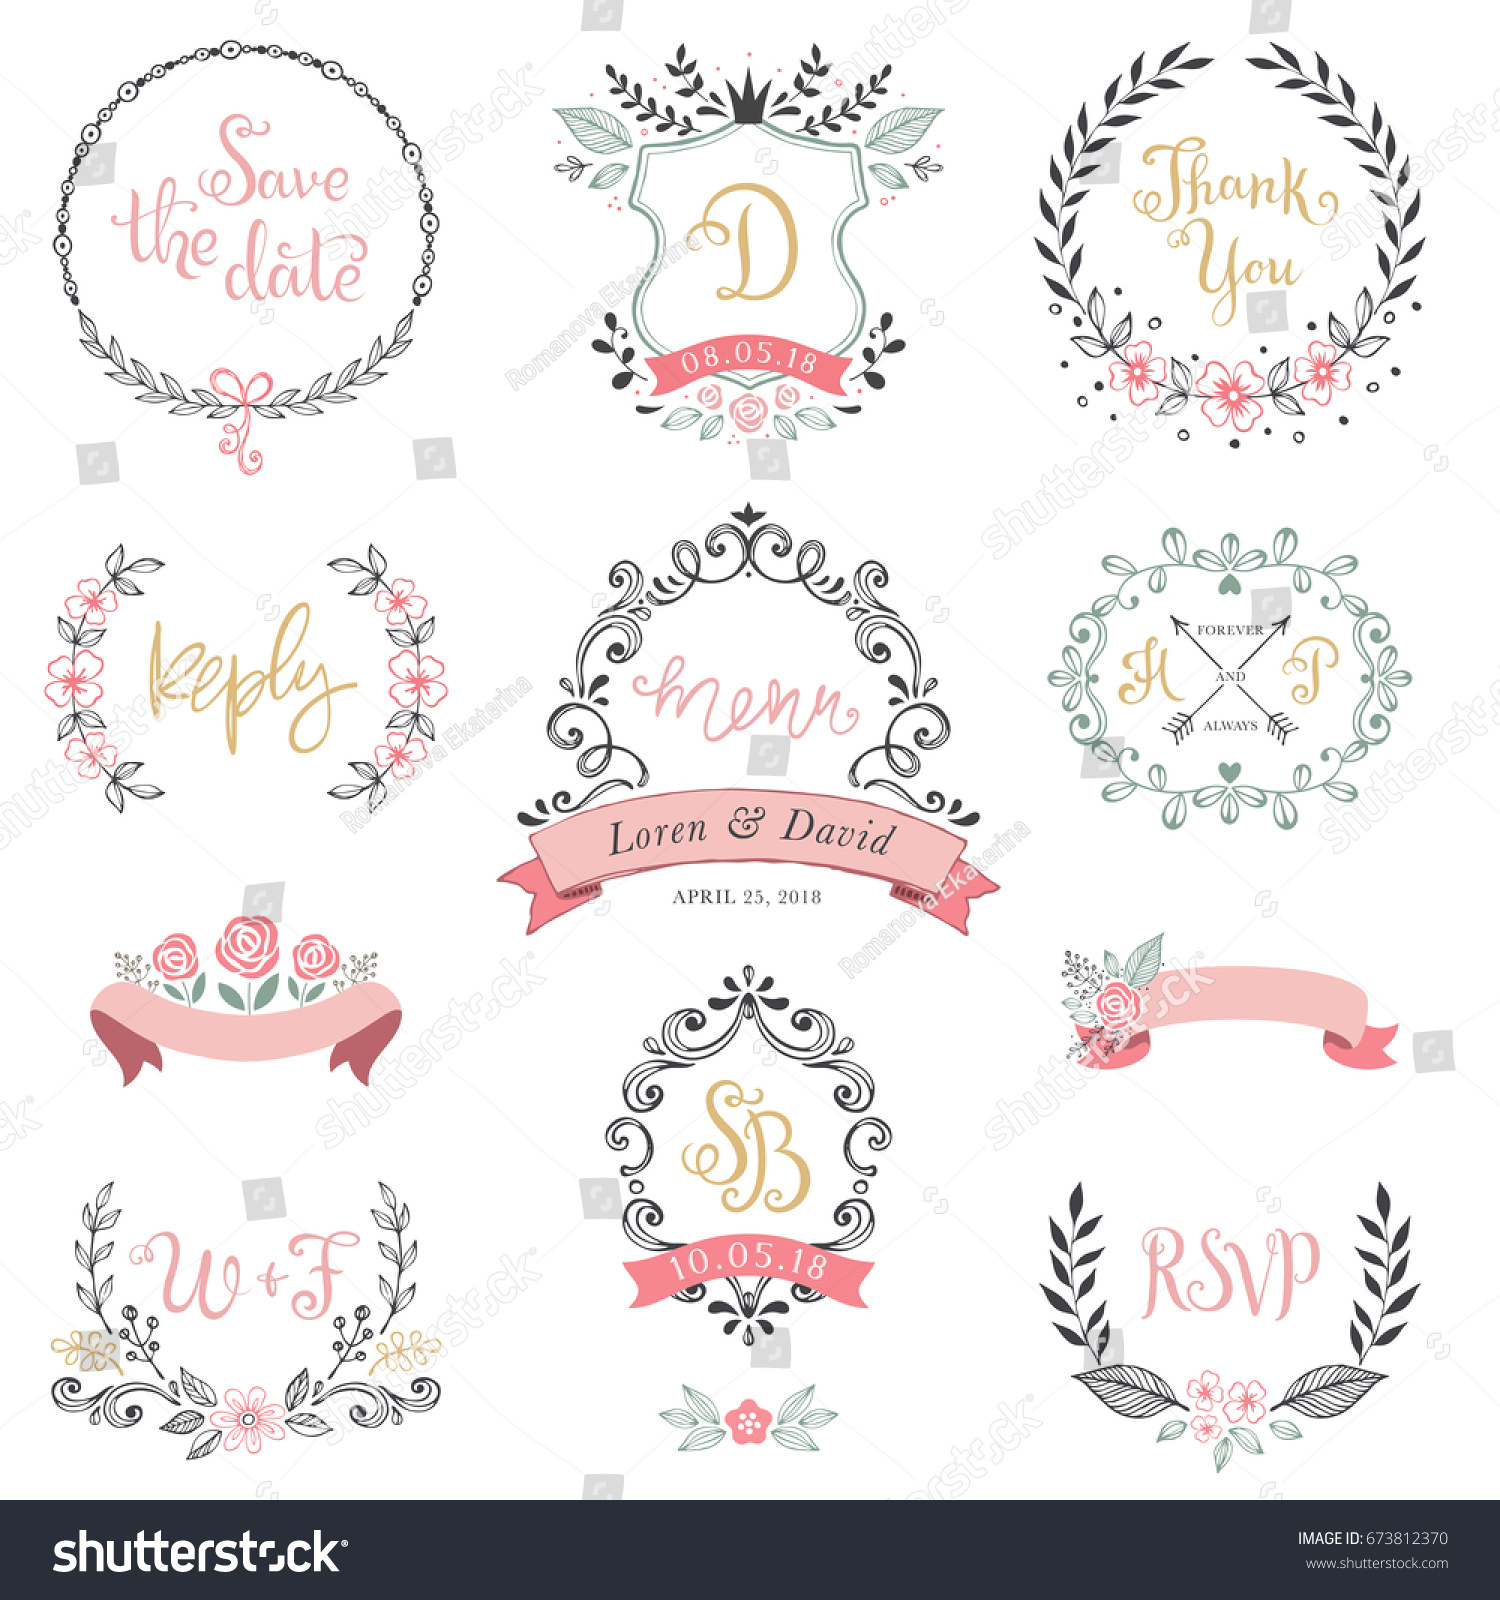 Floral wreaths, monograms and frames collection. Set of cute hand drawing retro rustic design elements perfect for wedding invitations, save the date, thank you, menu, reply and greeting cards. #673812370